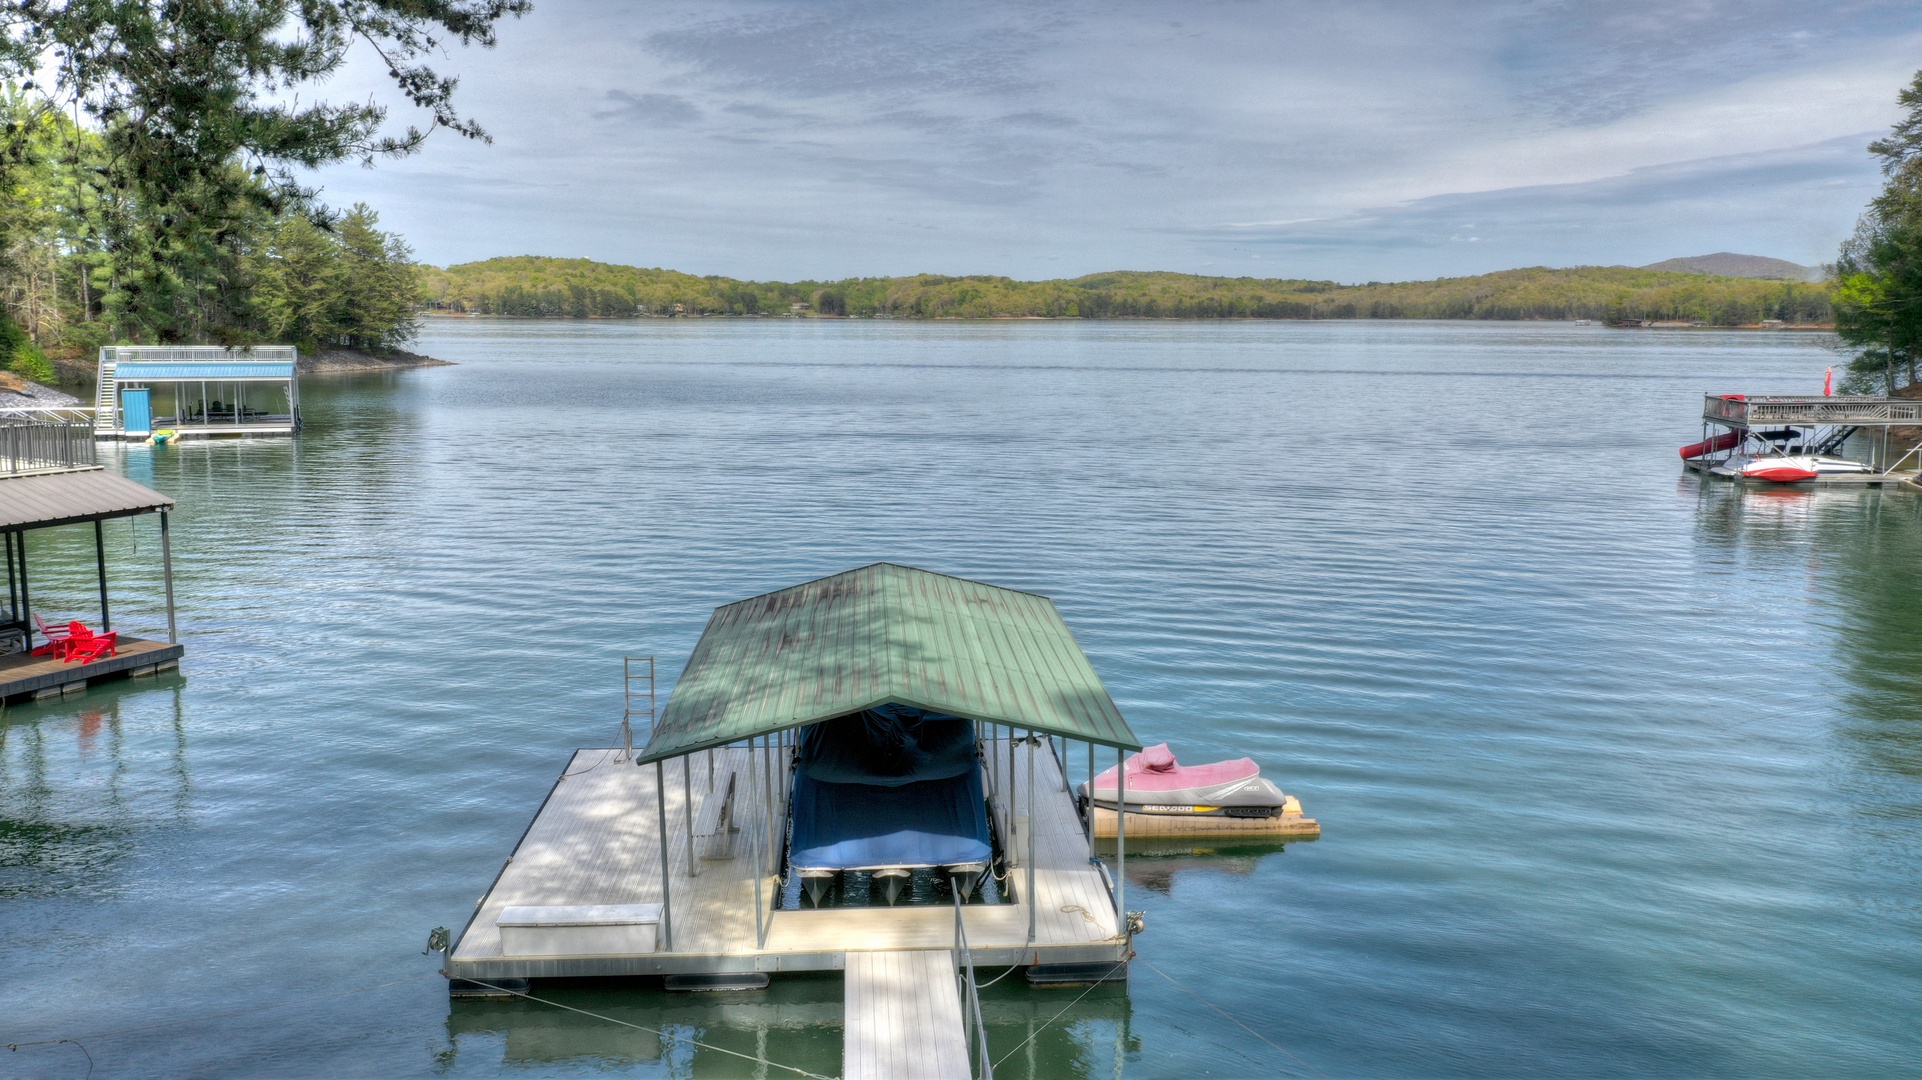 When In Rome- Aerial view of the boat dock and long range lake views